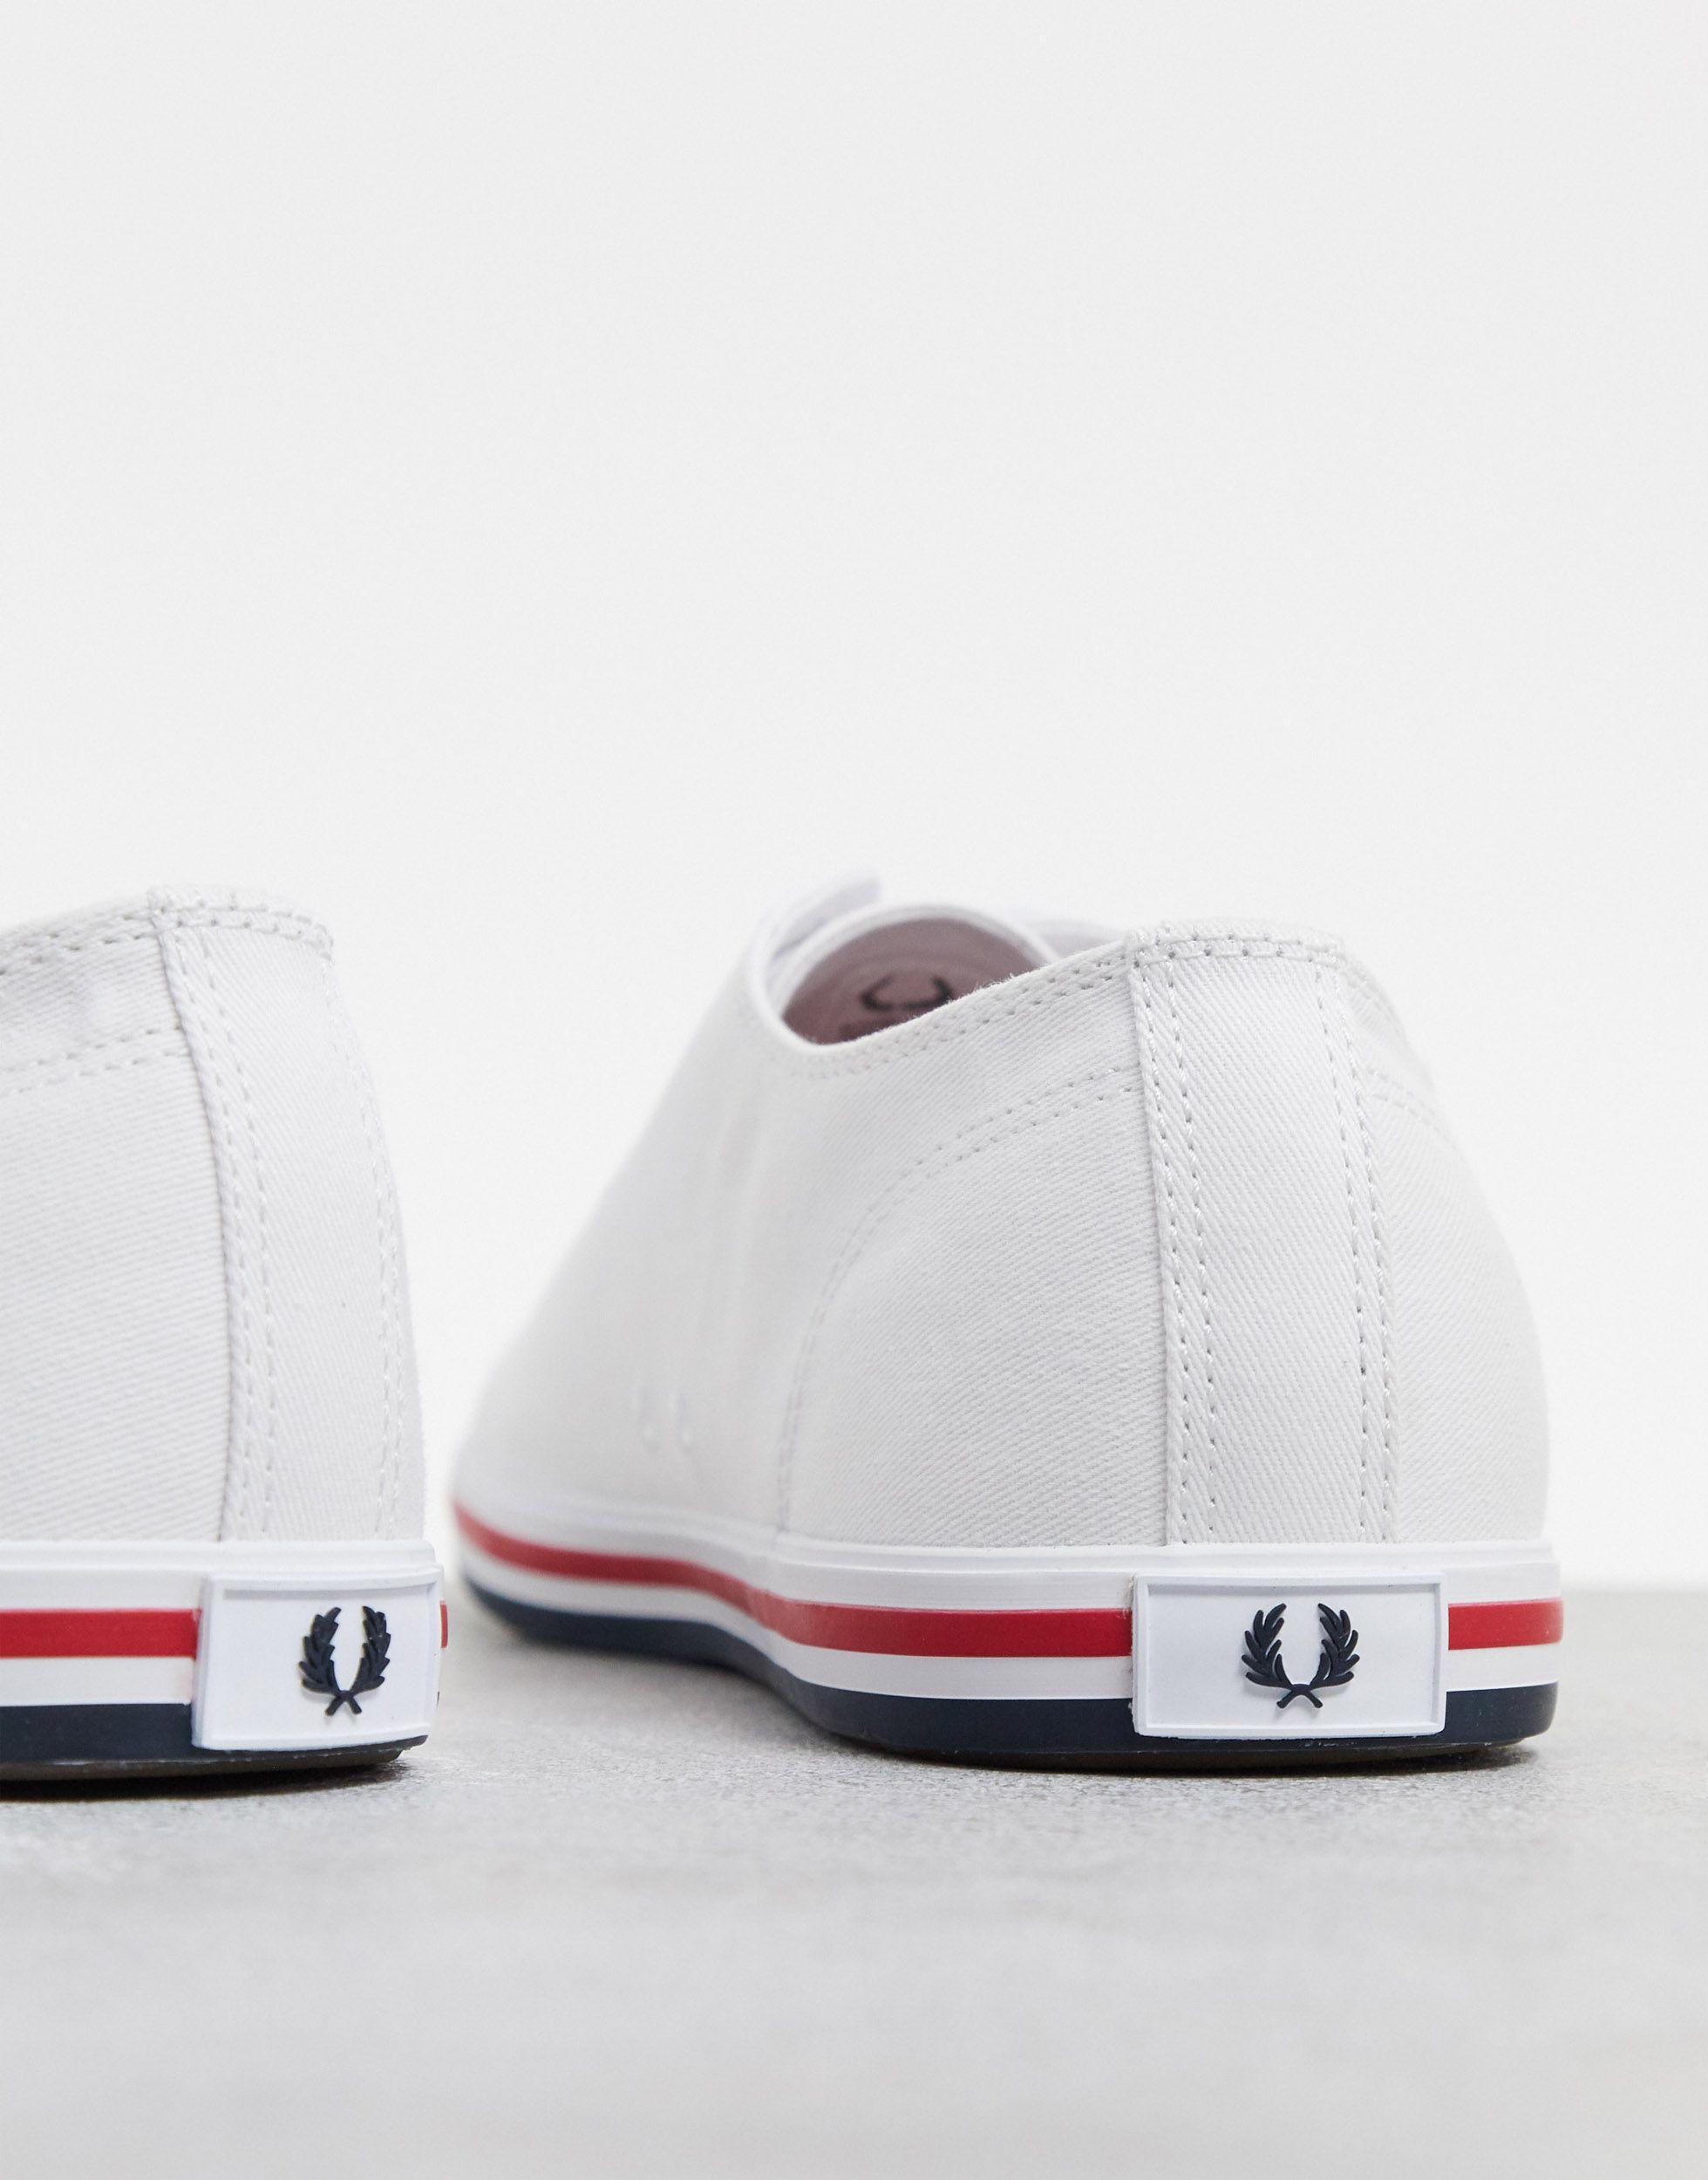 Fred Perry Kingston Twill Plimsolls in White for Men - Lyst